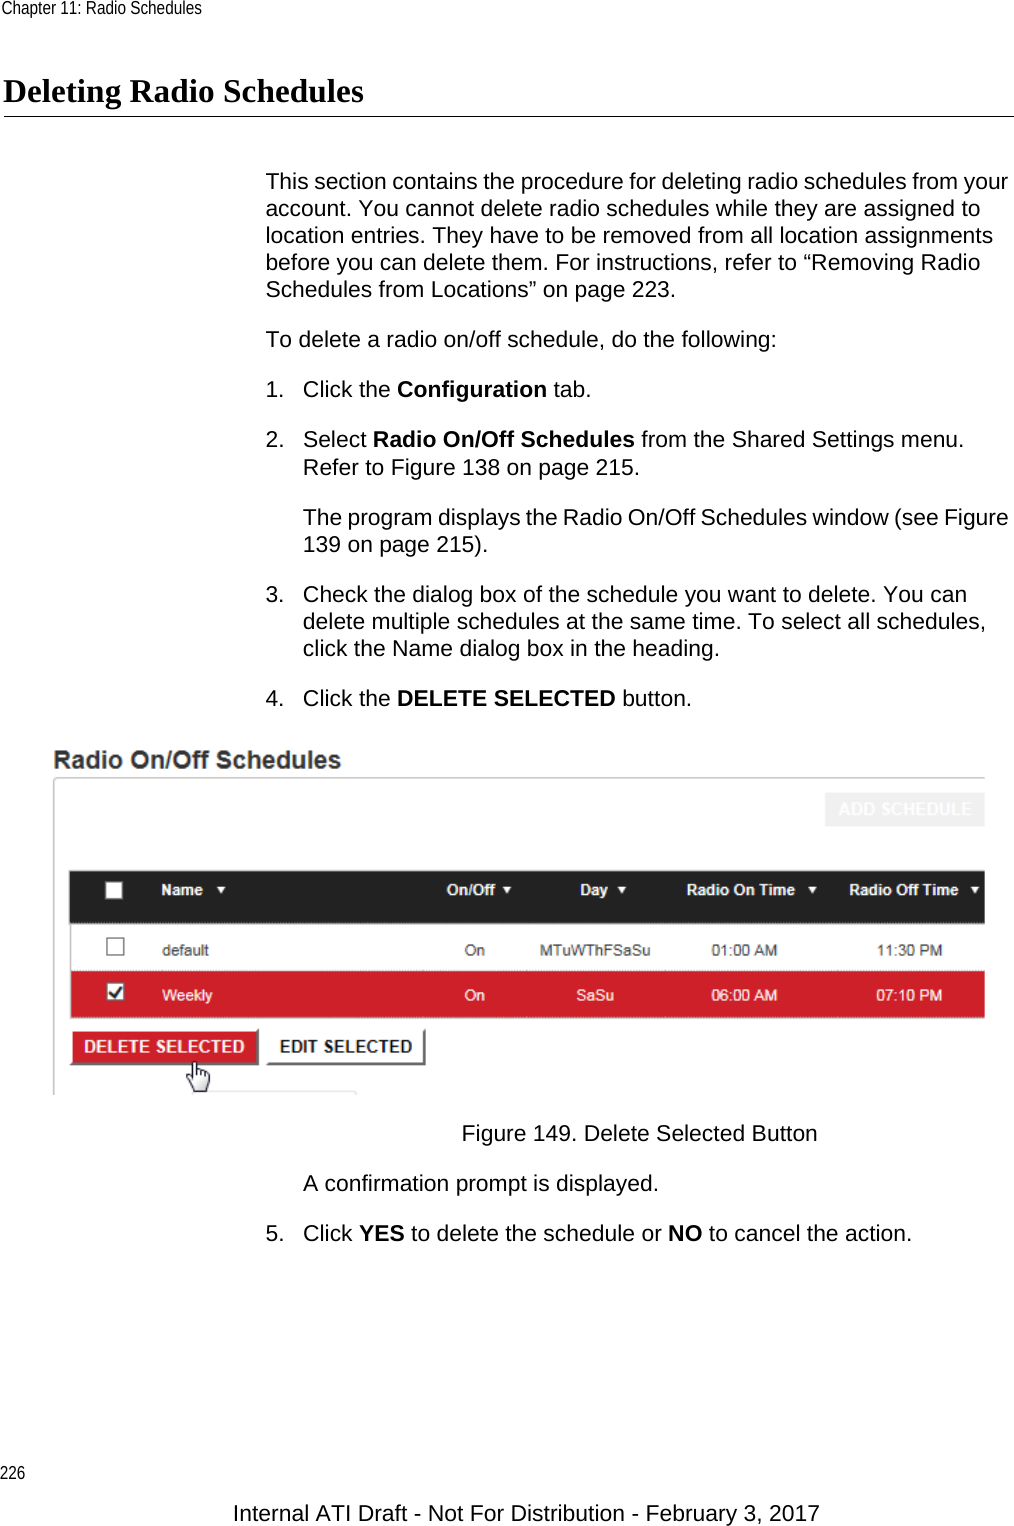 Chapter 11: Radio Schedules226Deleting Radio SchedulesThis section contains the procedure for deleting radio schedules from your account. You cannot delete radio schedules while they are assigned to location entries. They have to be removed from all location assignments before you can delete them. For instructions, refer to “Removing Radio Schedules from Locations” on page 223.To delete a radio on/off schedule, do the following:1. Click the Configuration tab.2. Select Radio On/Off Schedules from the Shared Settings menu. Refer to Figure 138 on page 215.The program displays the Radio On/Off Schedules window (see Figure 139 on page 215).3. Check the dialog box of the schedule you want to delete. You can delete multiple schedules at the same time. To select all schedules, click the Name dialog box in the heading.4. Click the DELETE SELECTED button.Figure 149. Delete Selected ButtonA confirmation prompt is displayed.5. Click YES to delete the schedule or NO to cancel the action.Internal ATI Draft - Not For Distribution - February 3, 2017